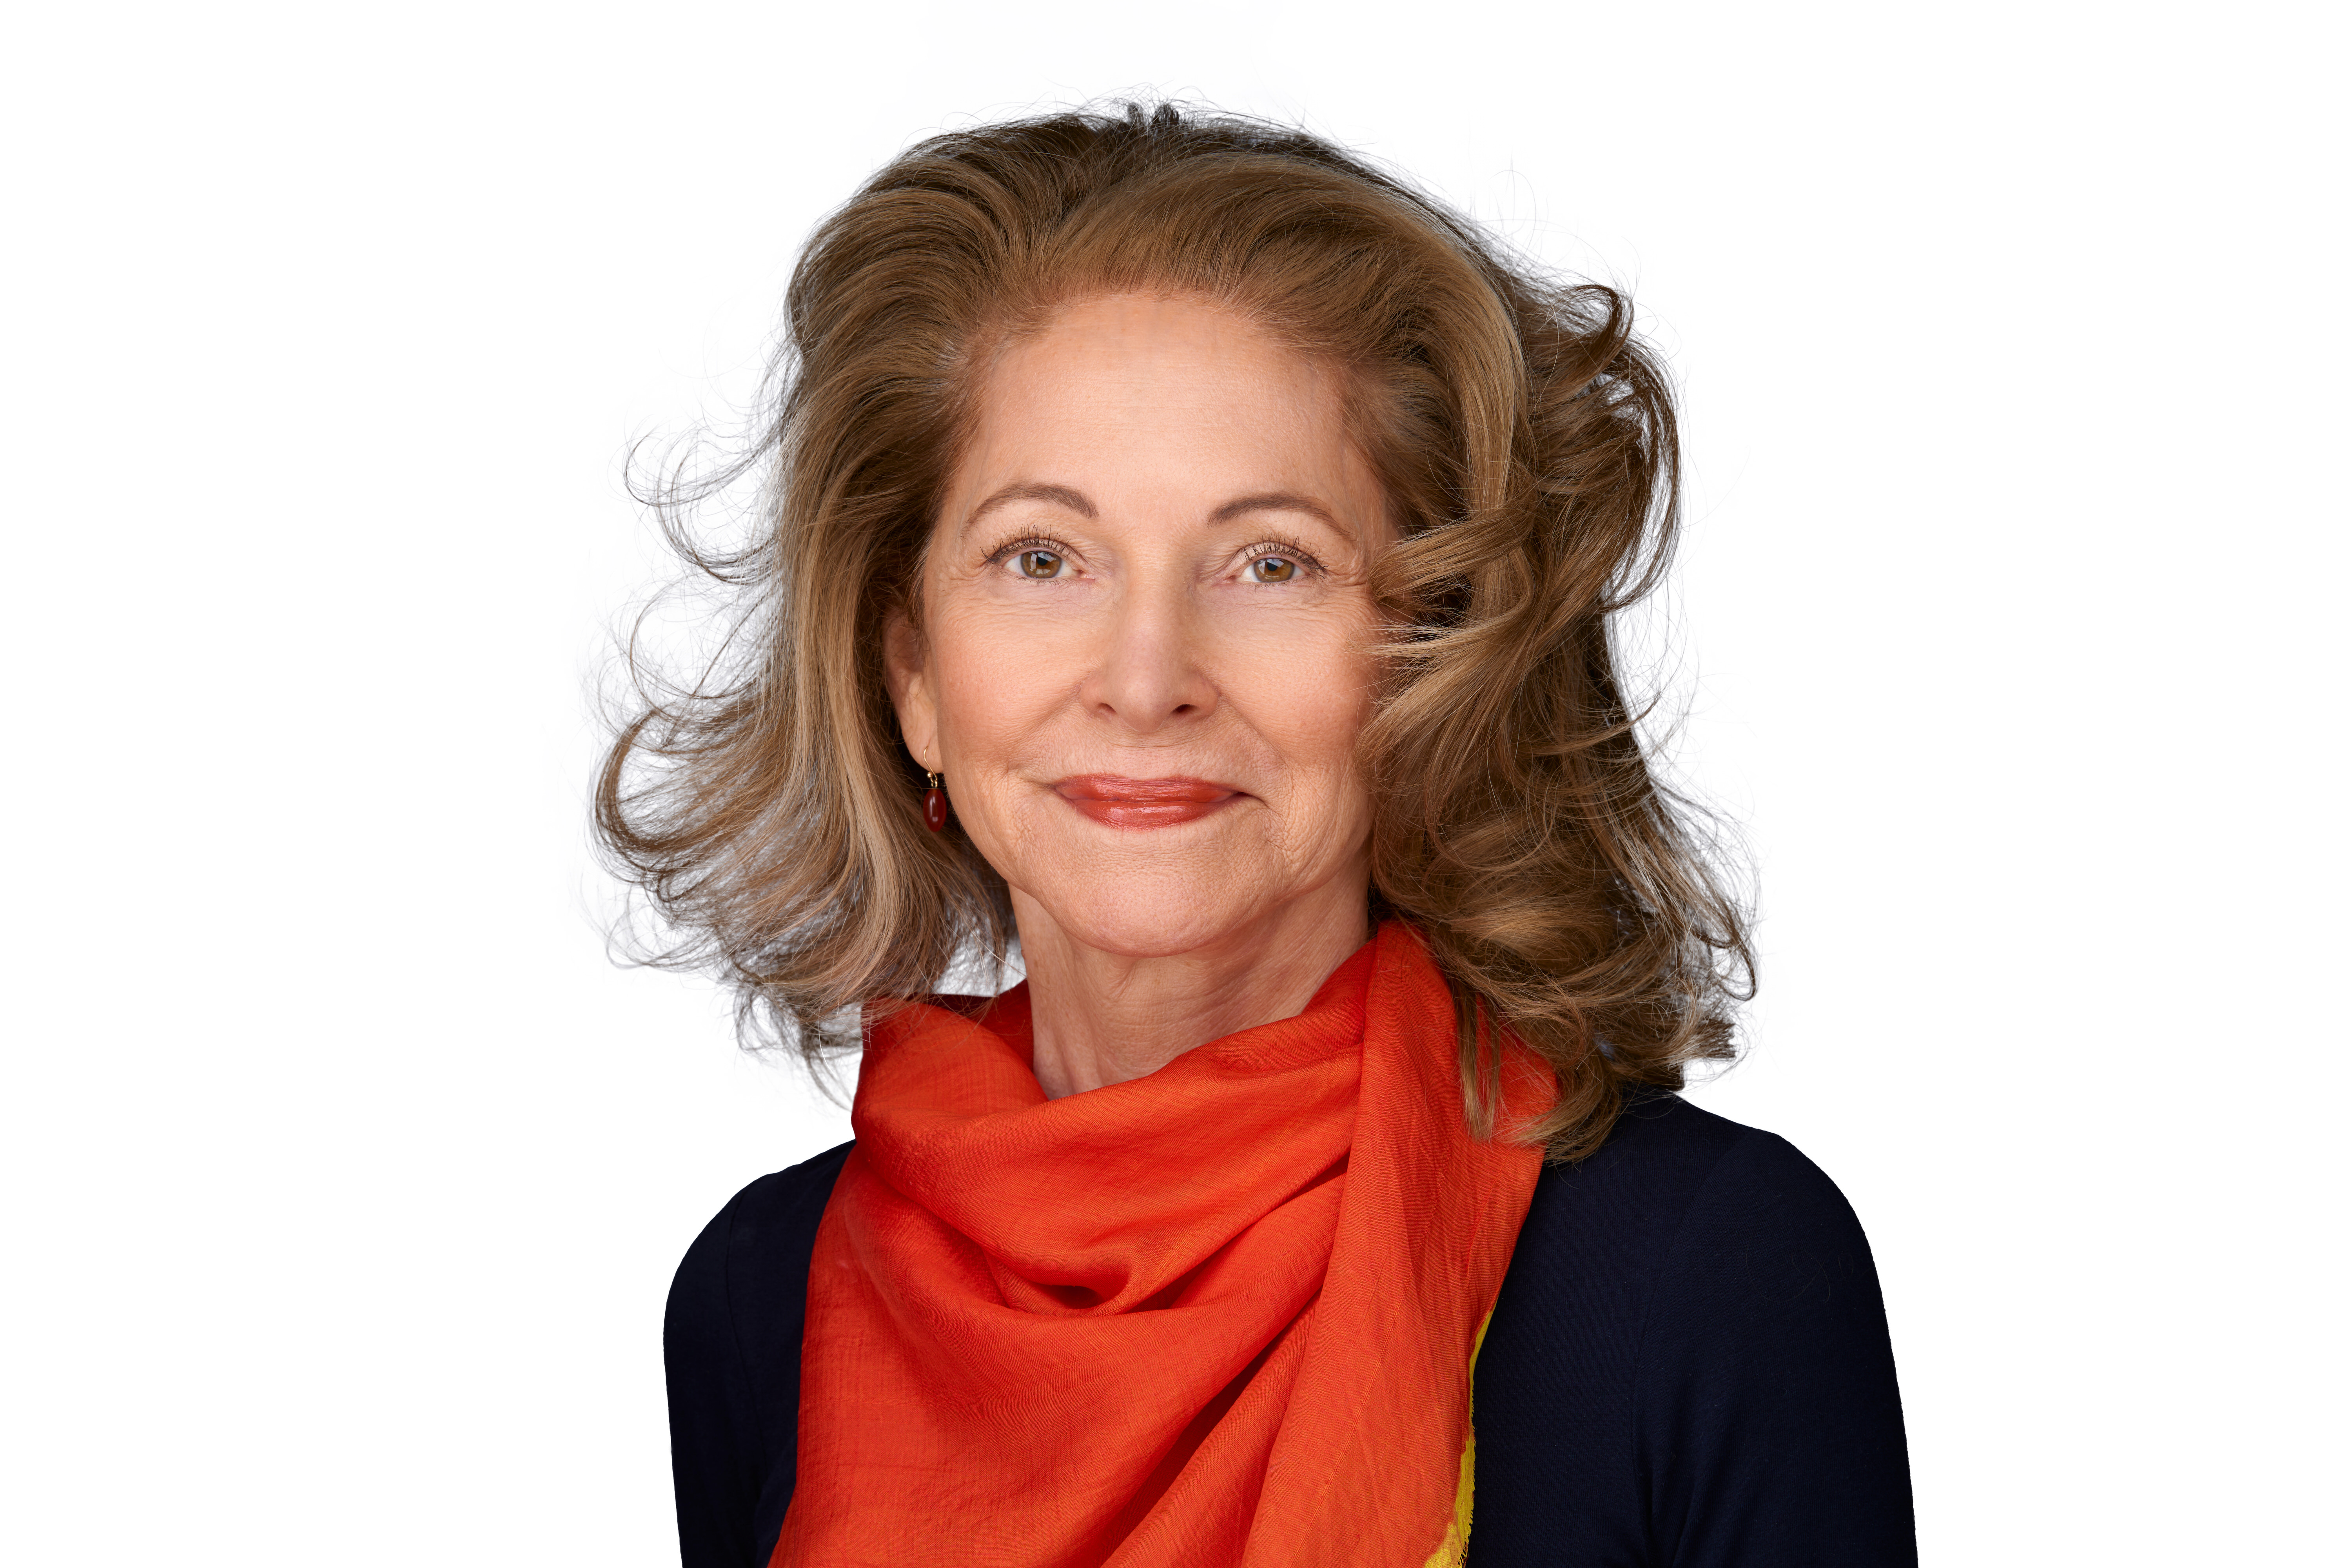 Photo of Susan McDonald, Chairman and Co-Founder at Calculus Capital, London